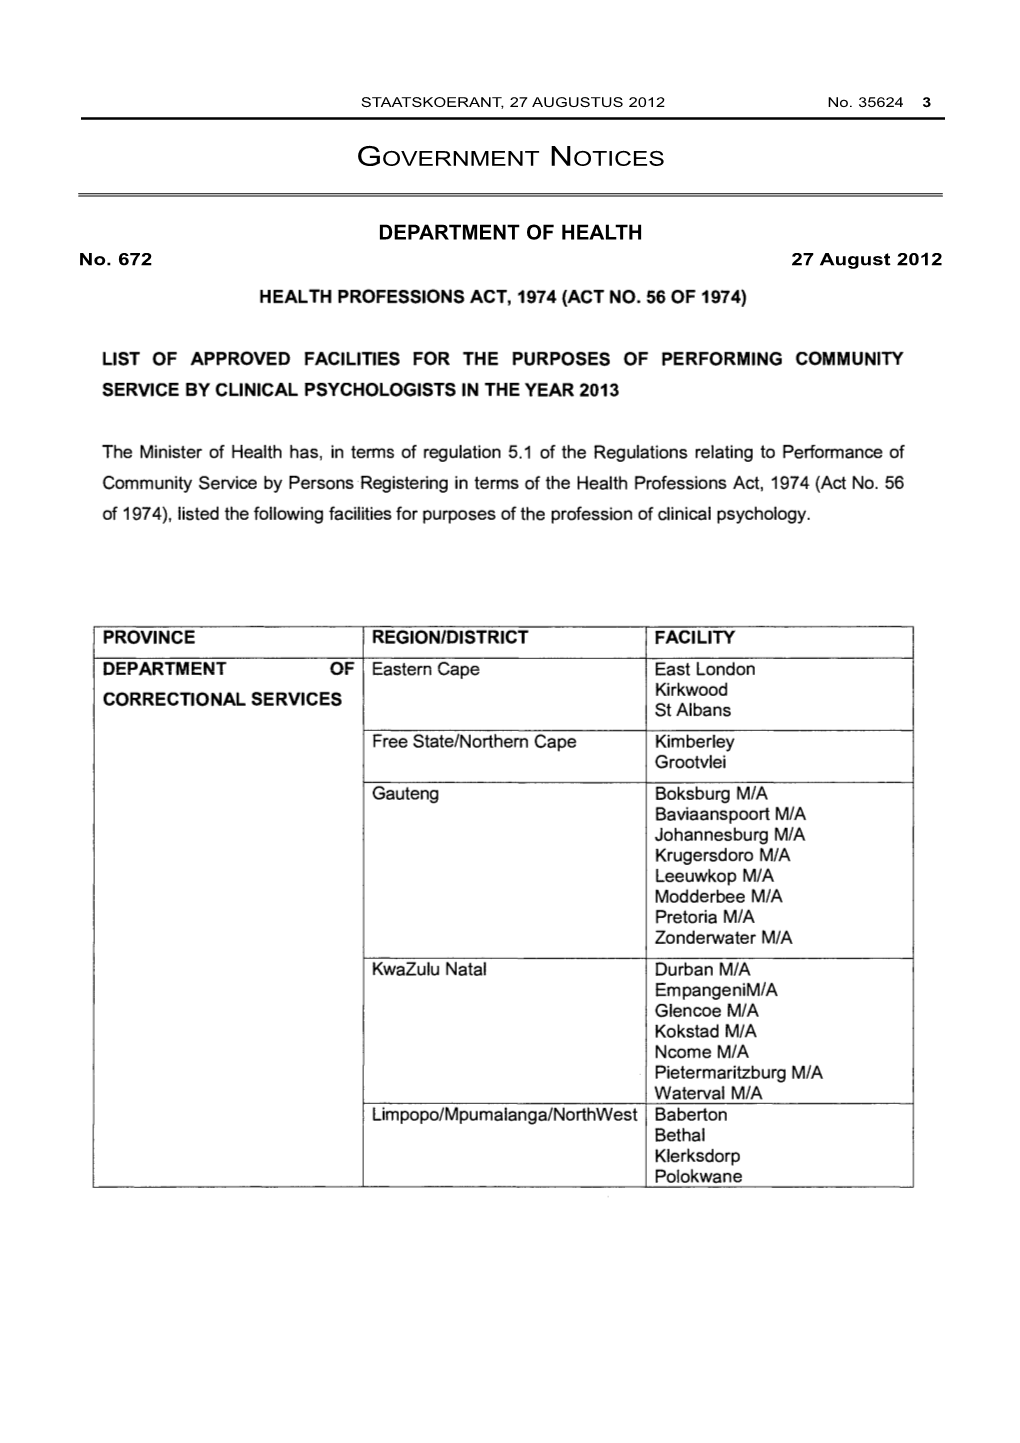 Health Professions Act: List of Approved Facilities for Purposes of Performing Community Service by Clinical Psychologists in 20